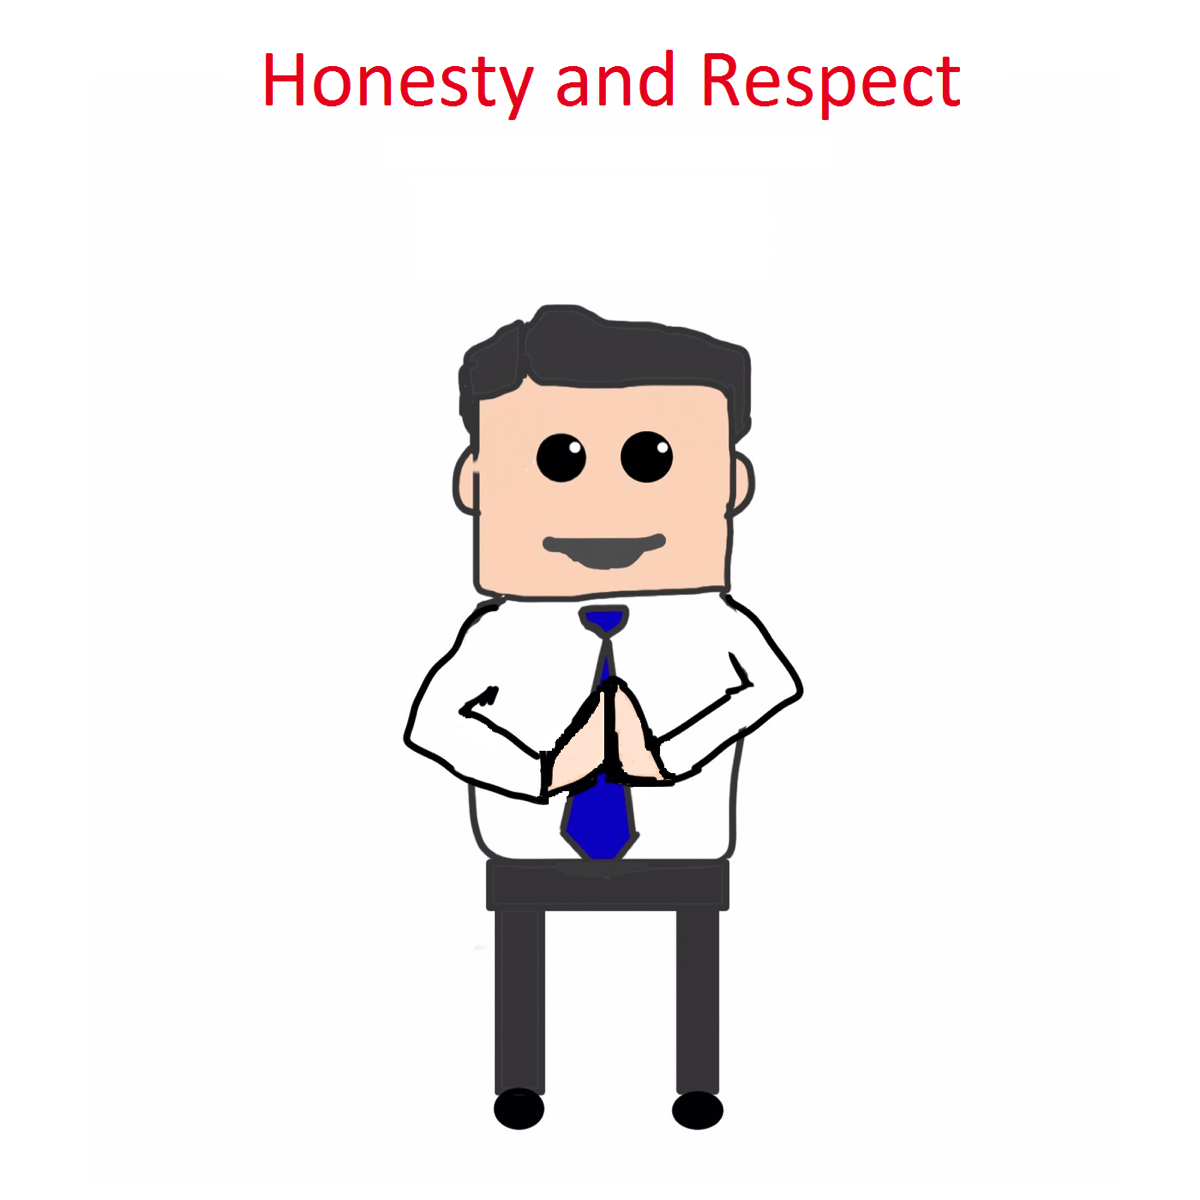 Honesty and Respect